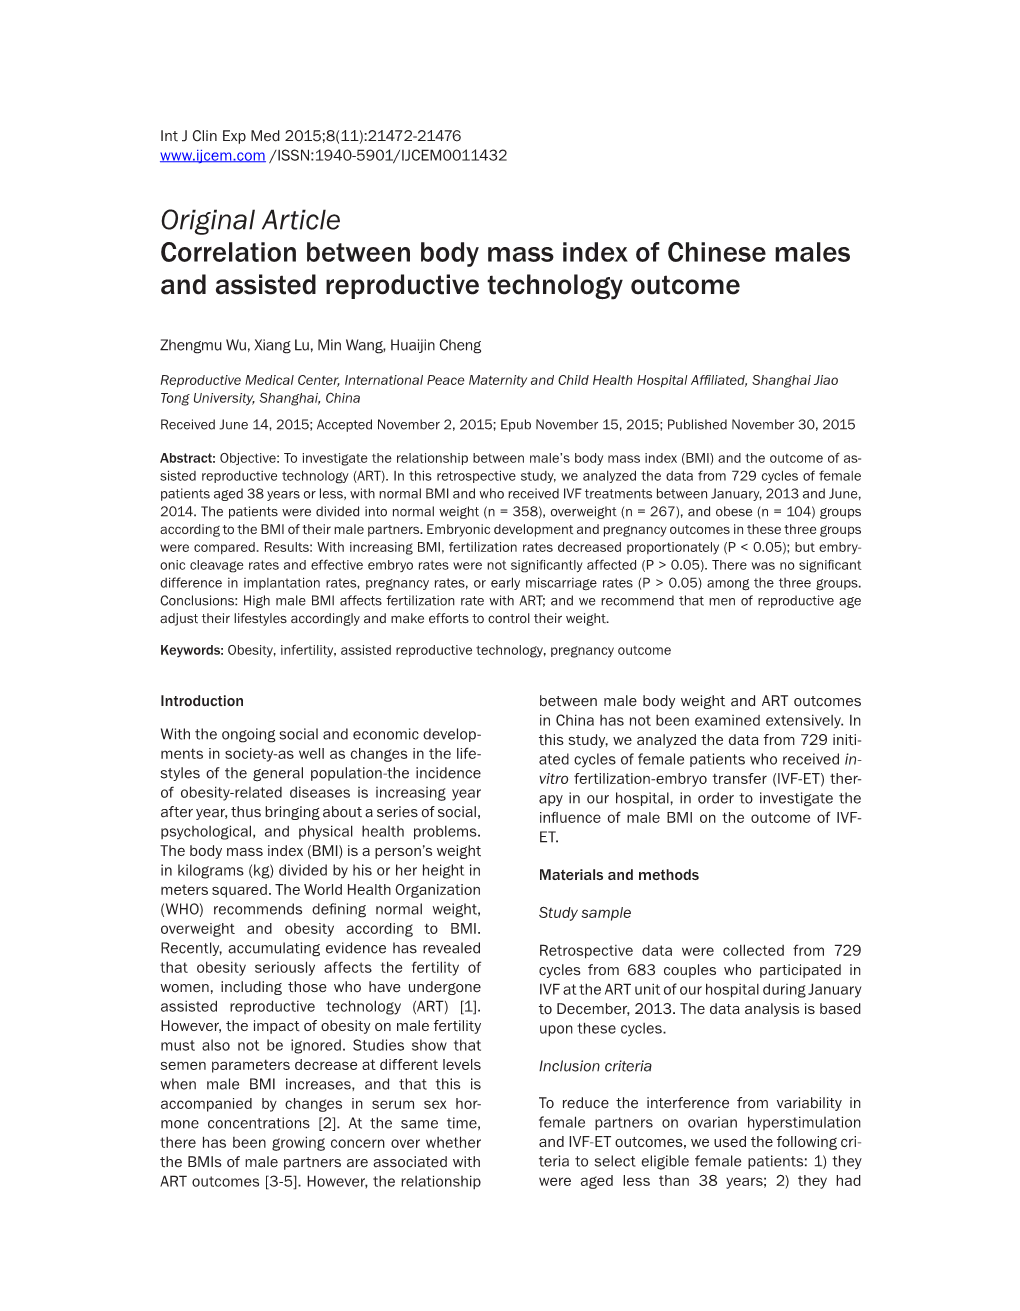 Original Article Correlation Between Body Mass Index of Chinese Males and Assisted Reproductive Technology Outcome